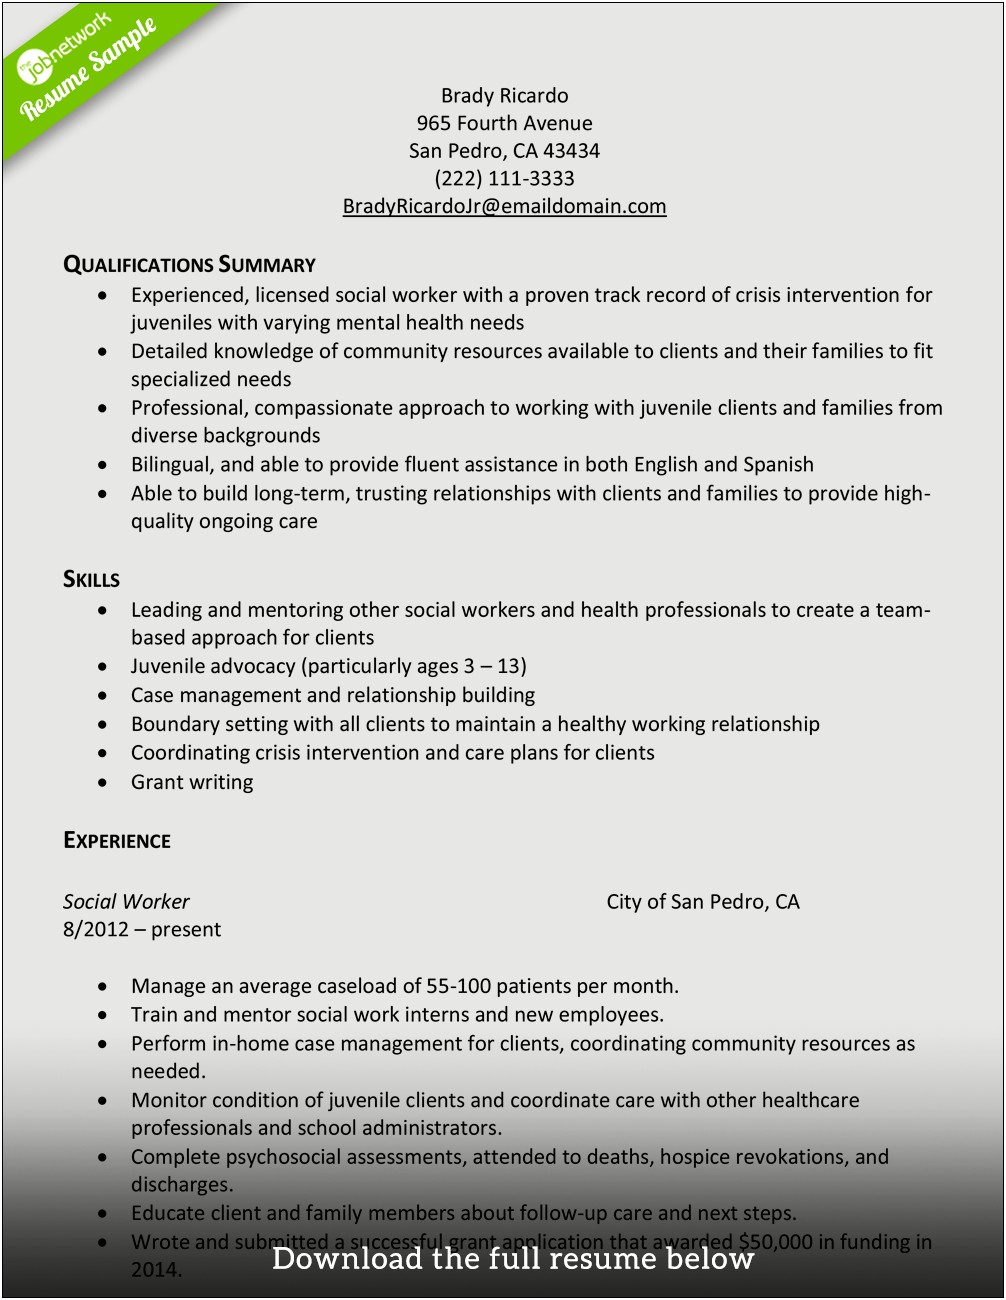 Best Resumes For Social Workers